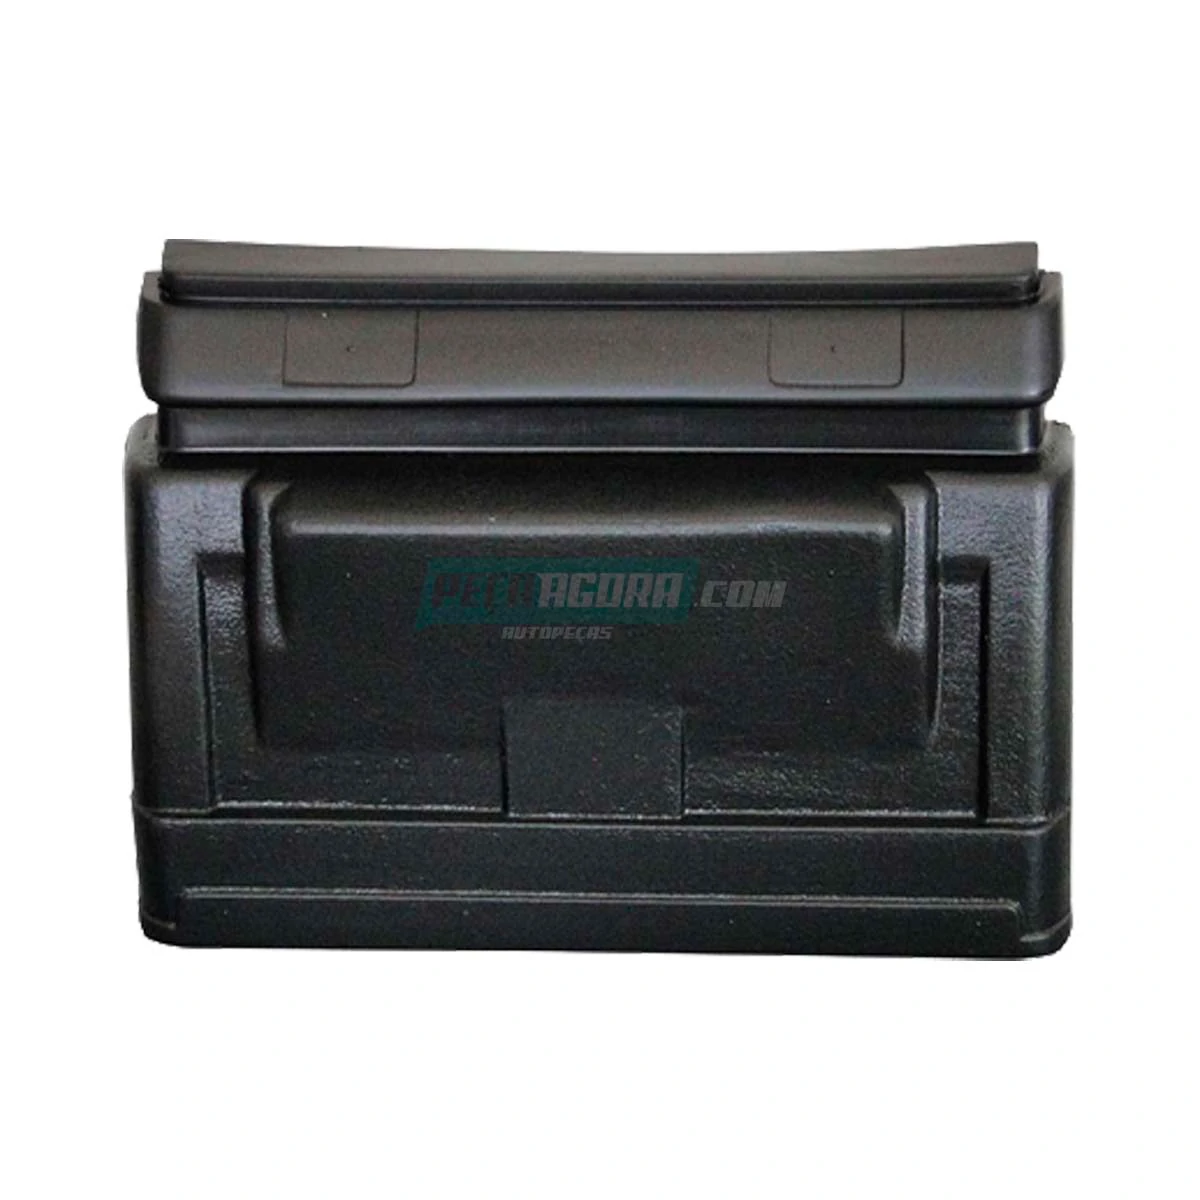 MEIO PARALAMA TRACAO TRASEIRO VW CONSTELLATION WORKER TITAN VOLKSWAGEN (2T0803227-2T0821927A-2T0803227A-Z618)